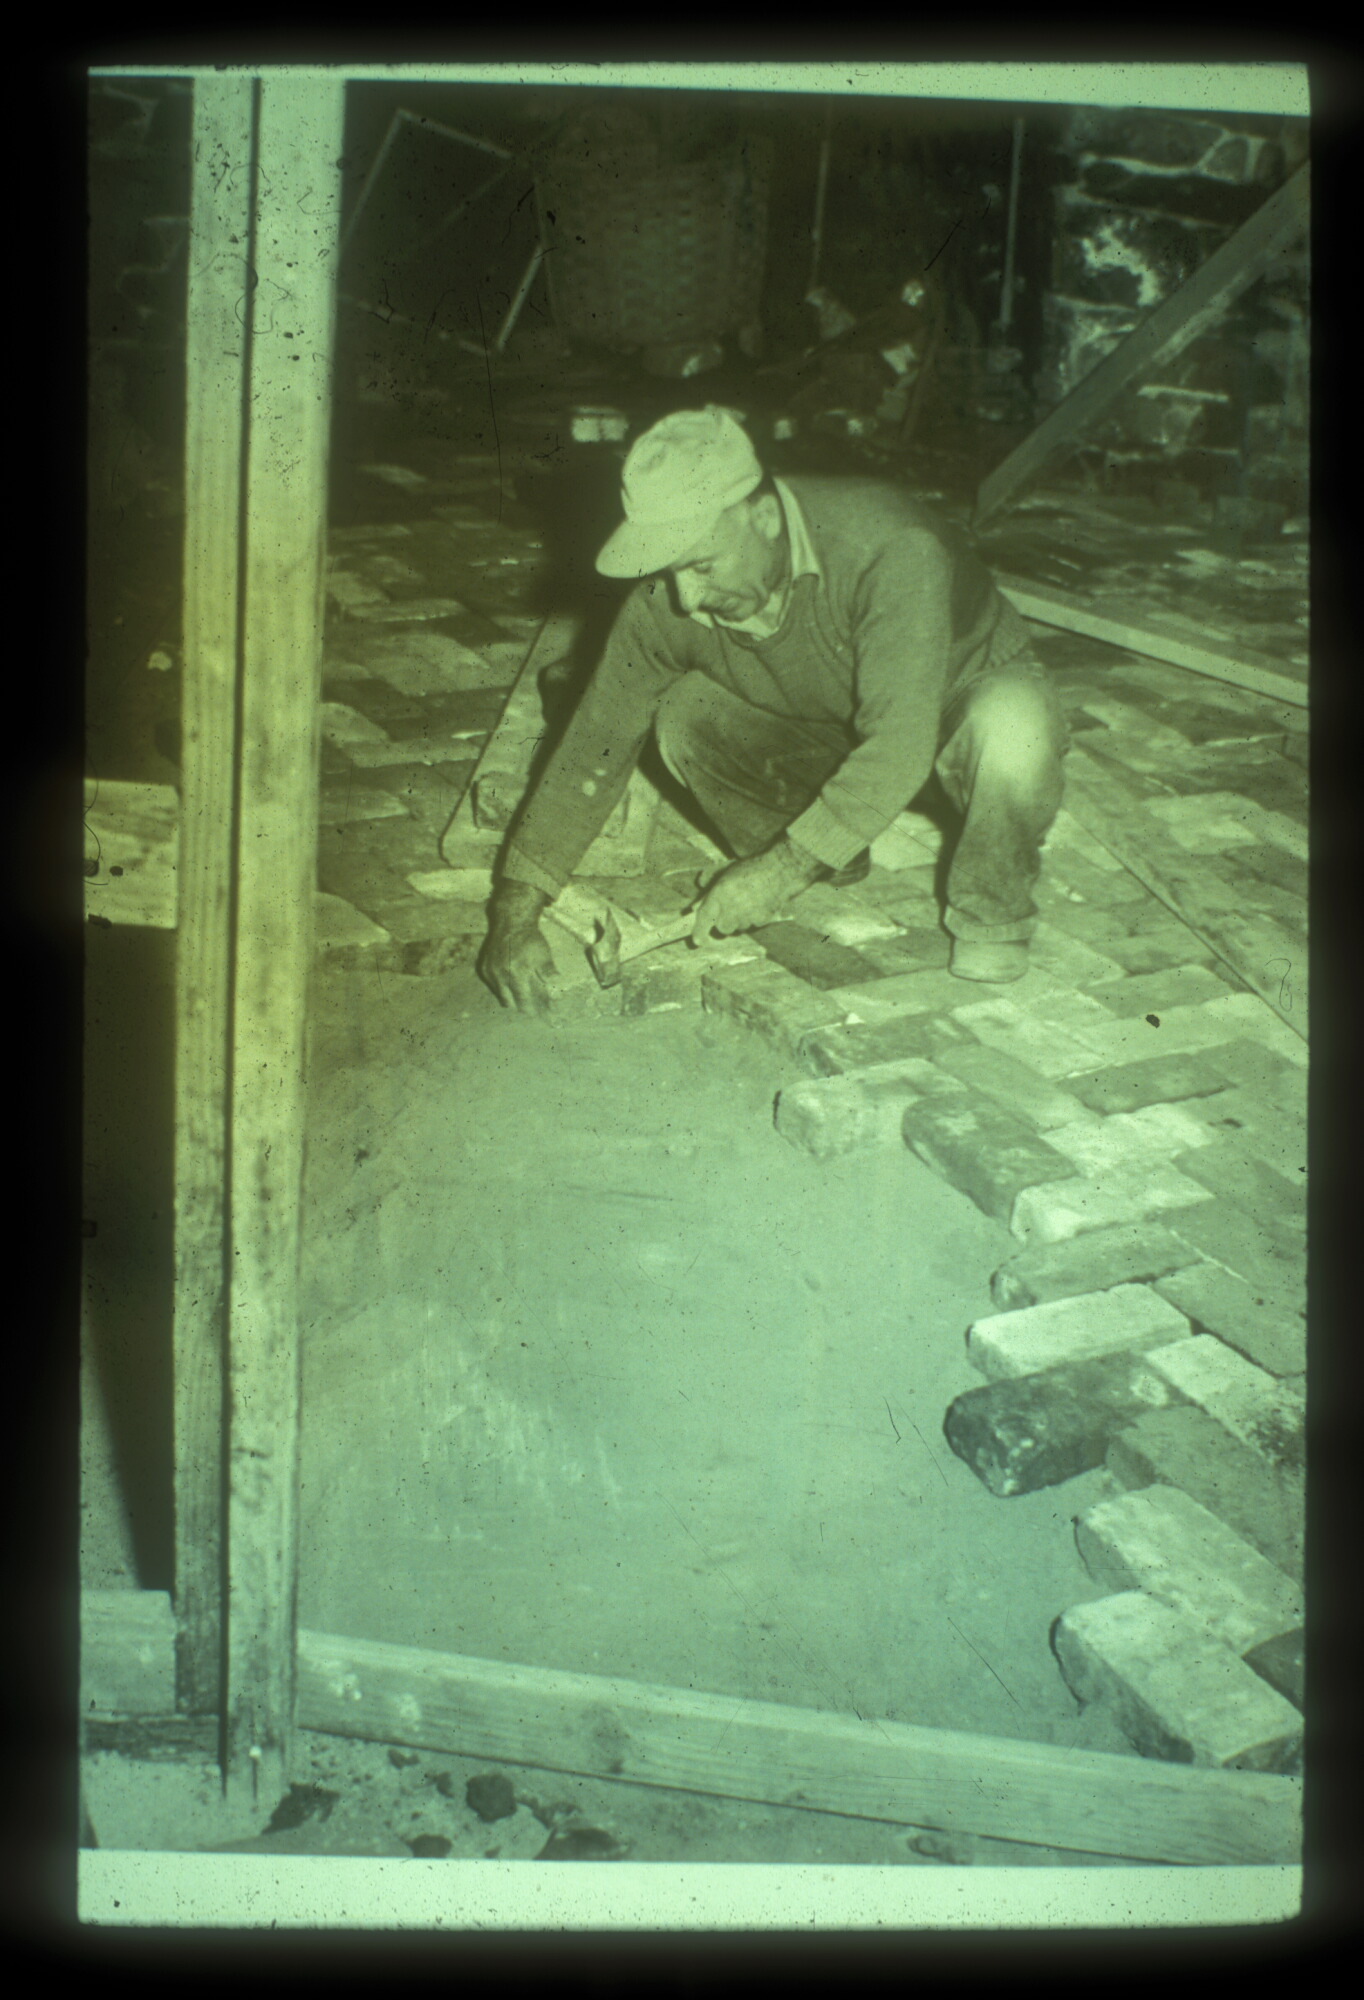 A man in a long sleeved shirt crouches down on a brick floor, tapping additional bricks into place with a hammer.